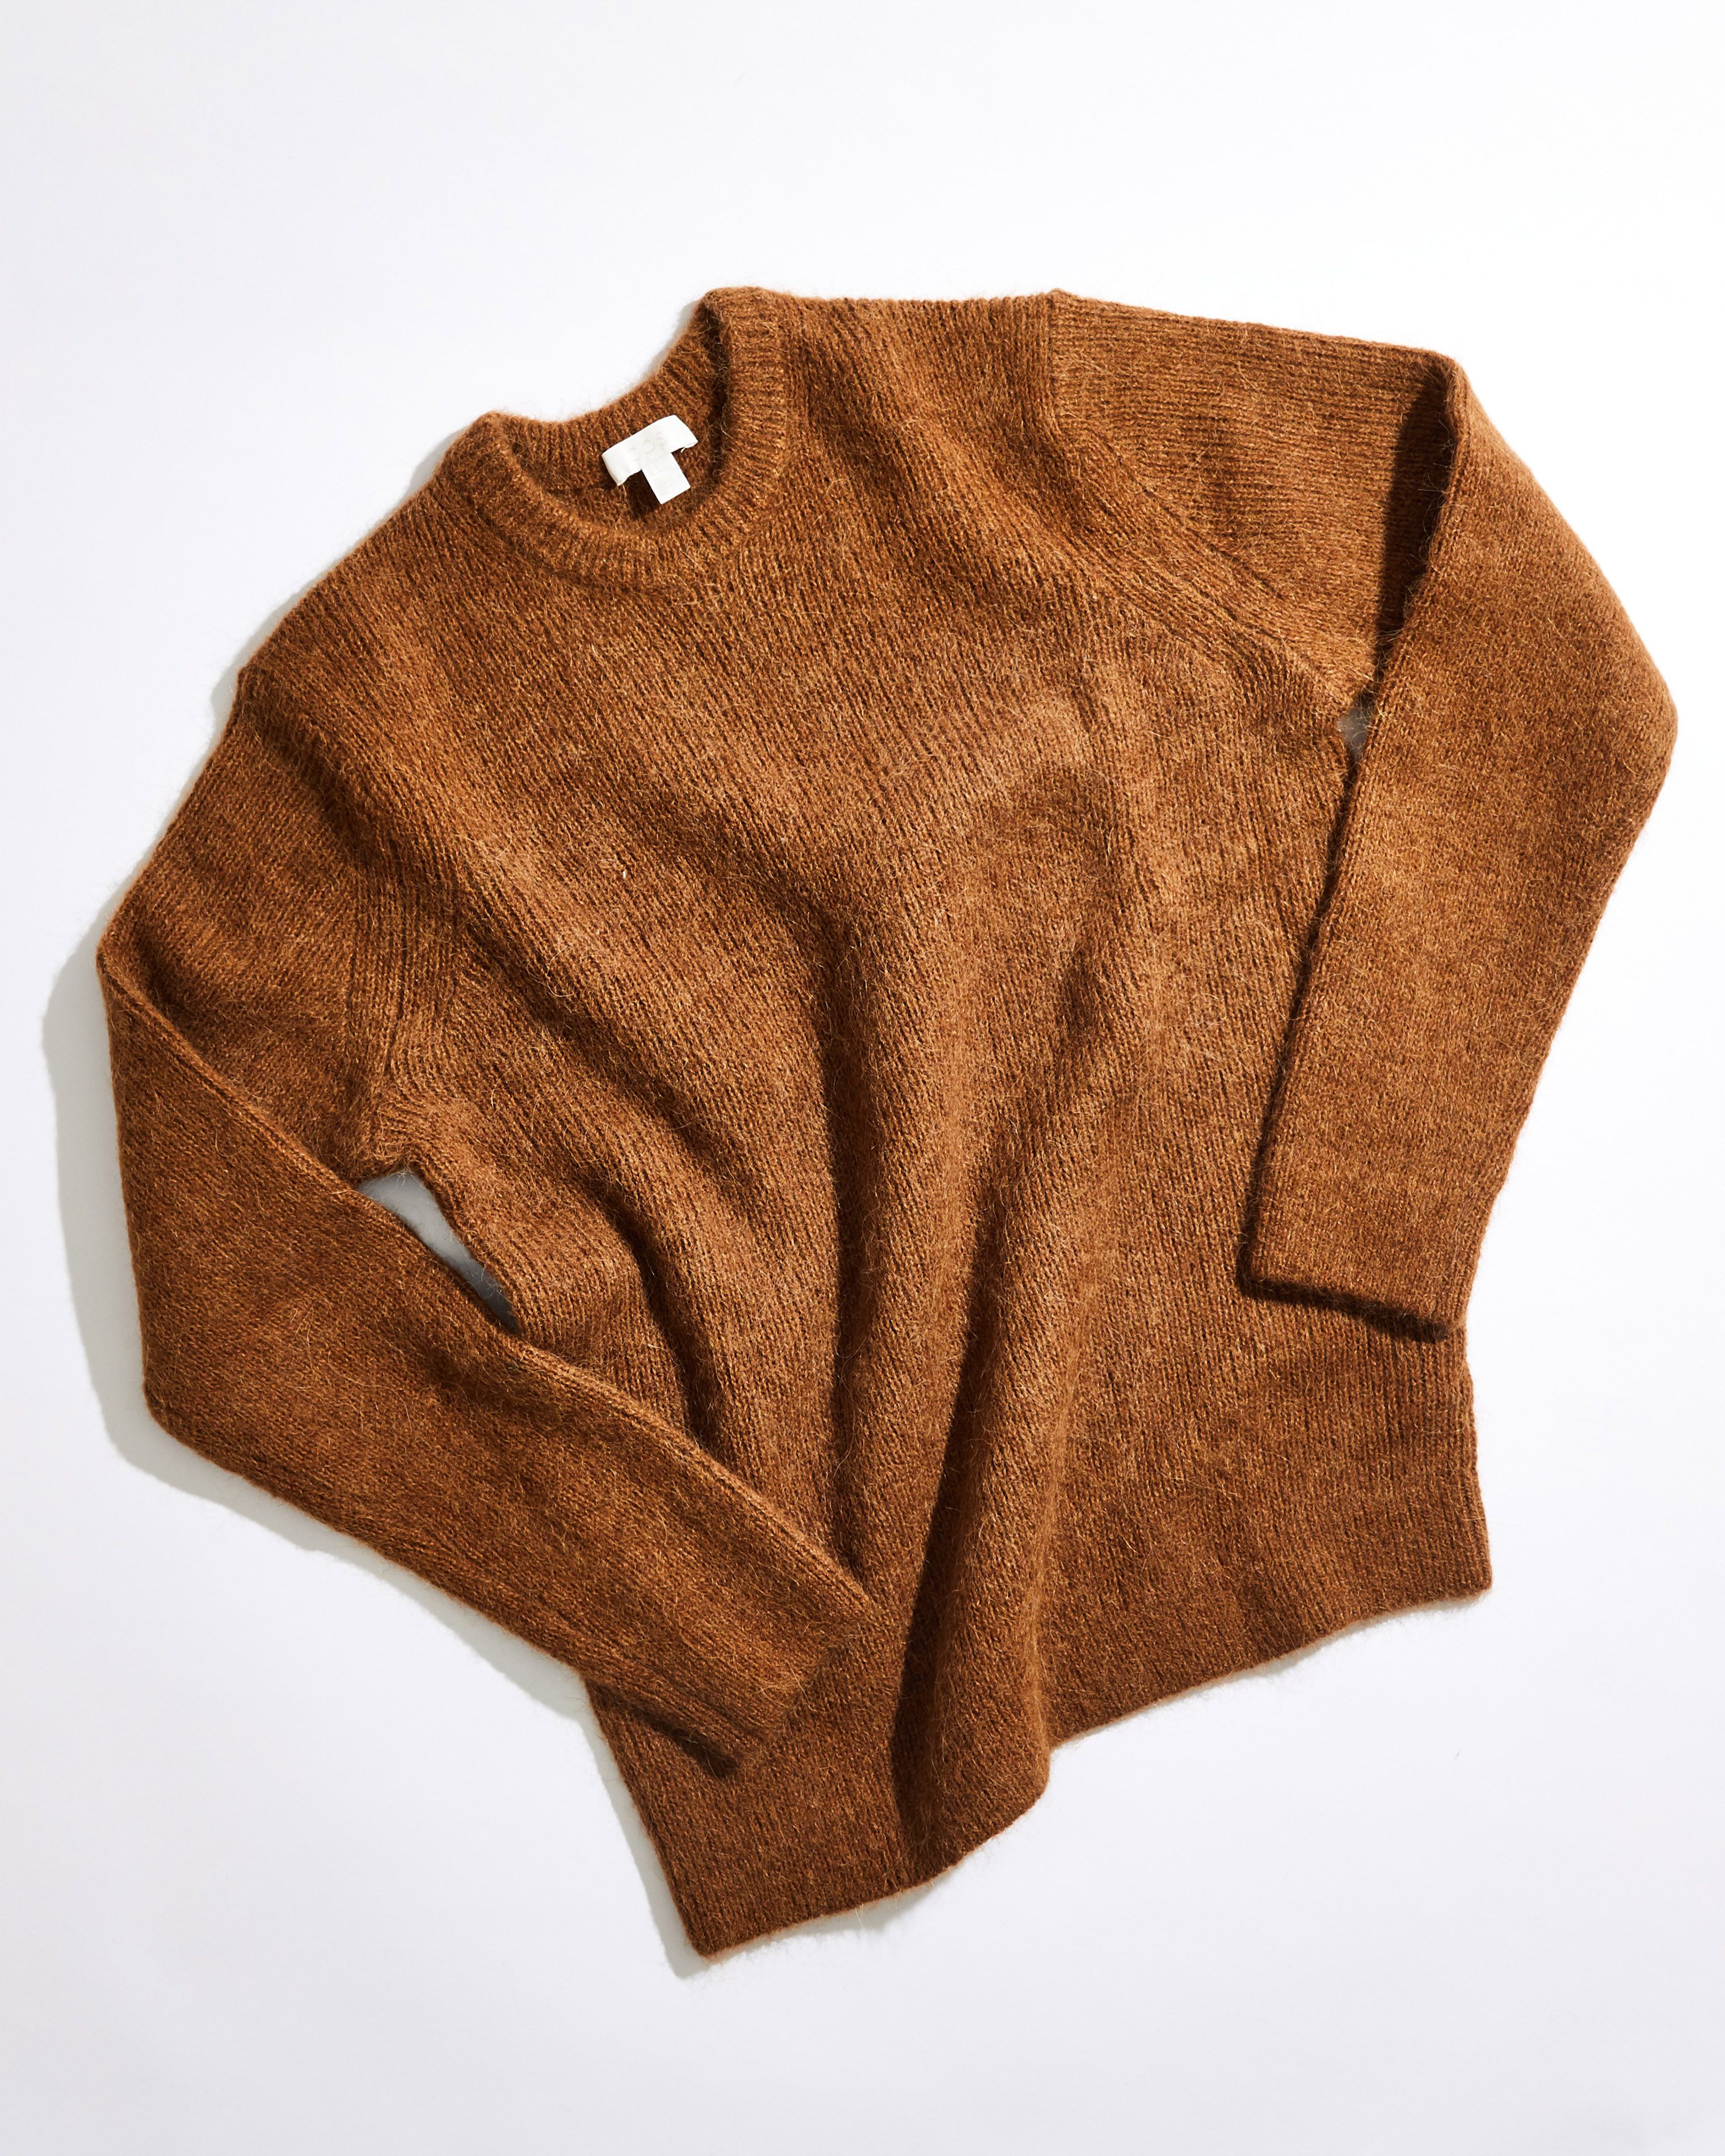 COS's Extremely Cozy Crewneck Sweater Looks Like It More It Does